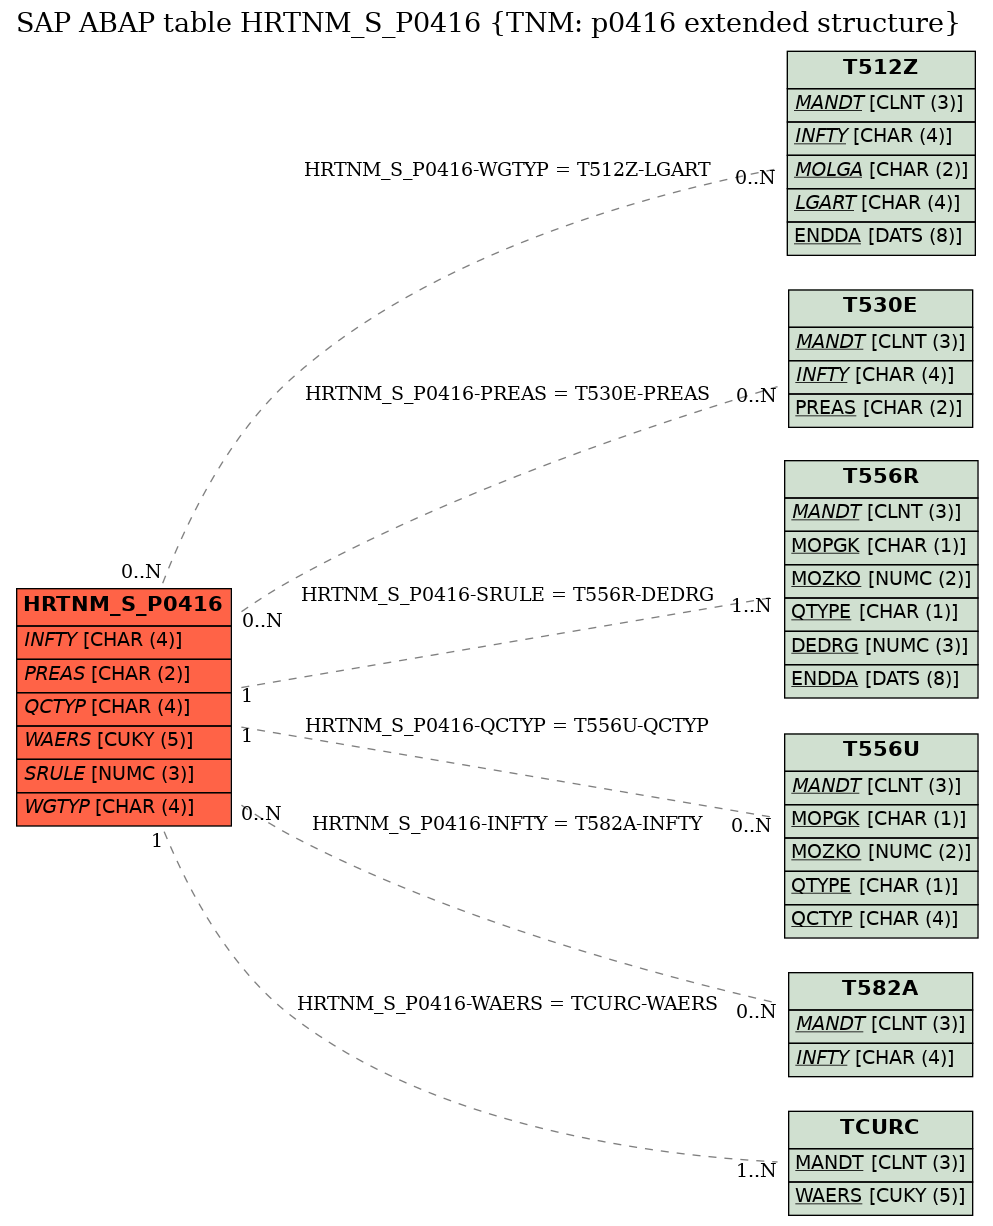 E-R Diagram for table HRTNM_S_P0416 (TNM: p0416 extended structure)